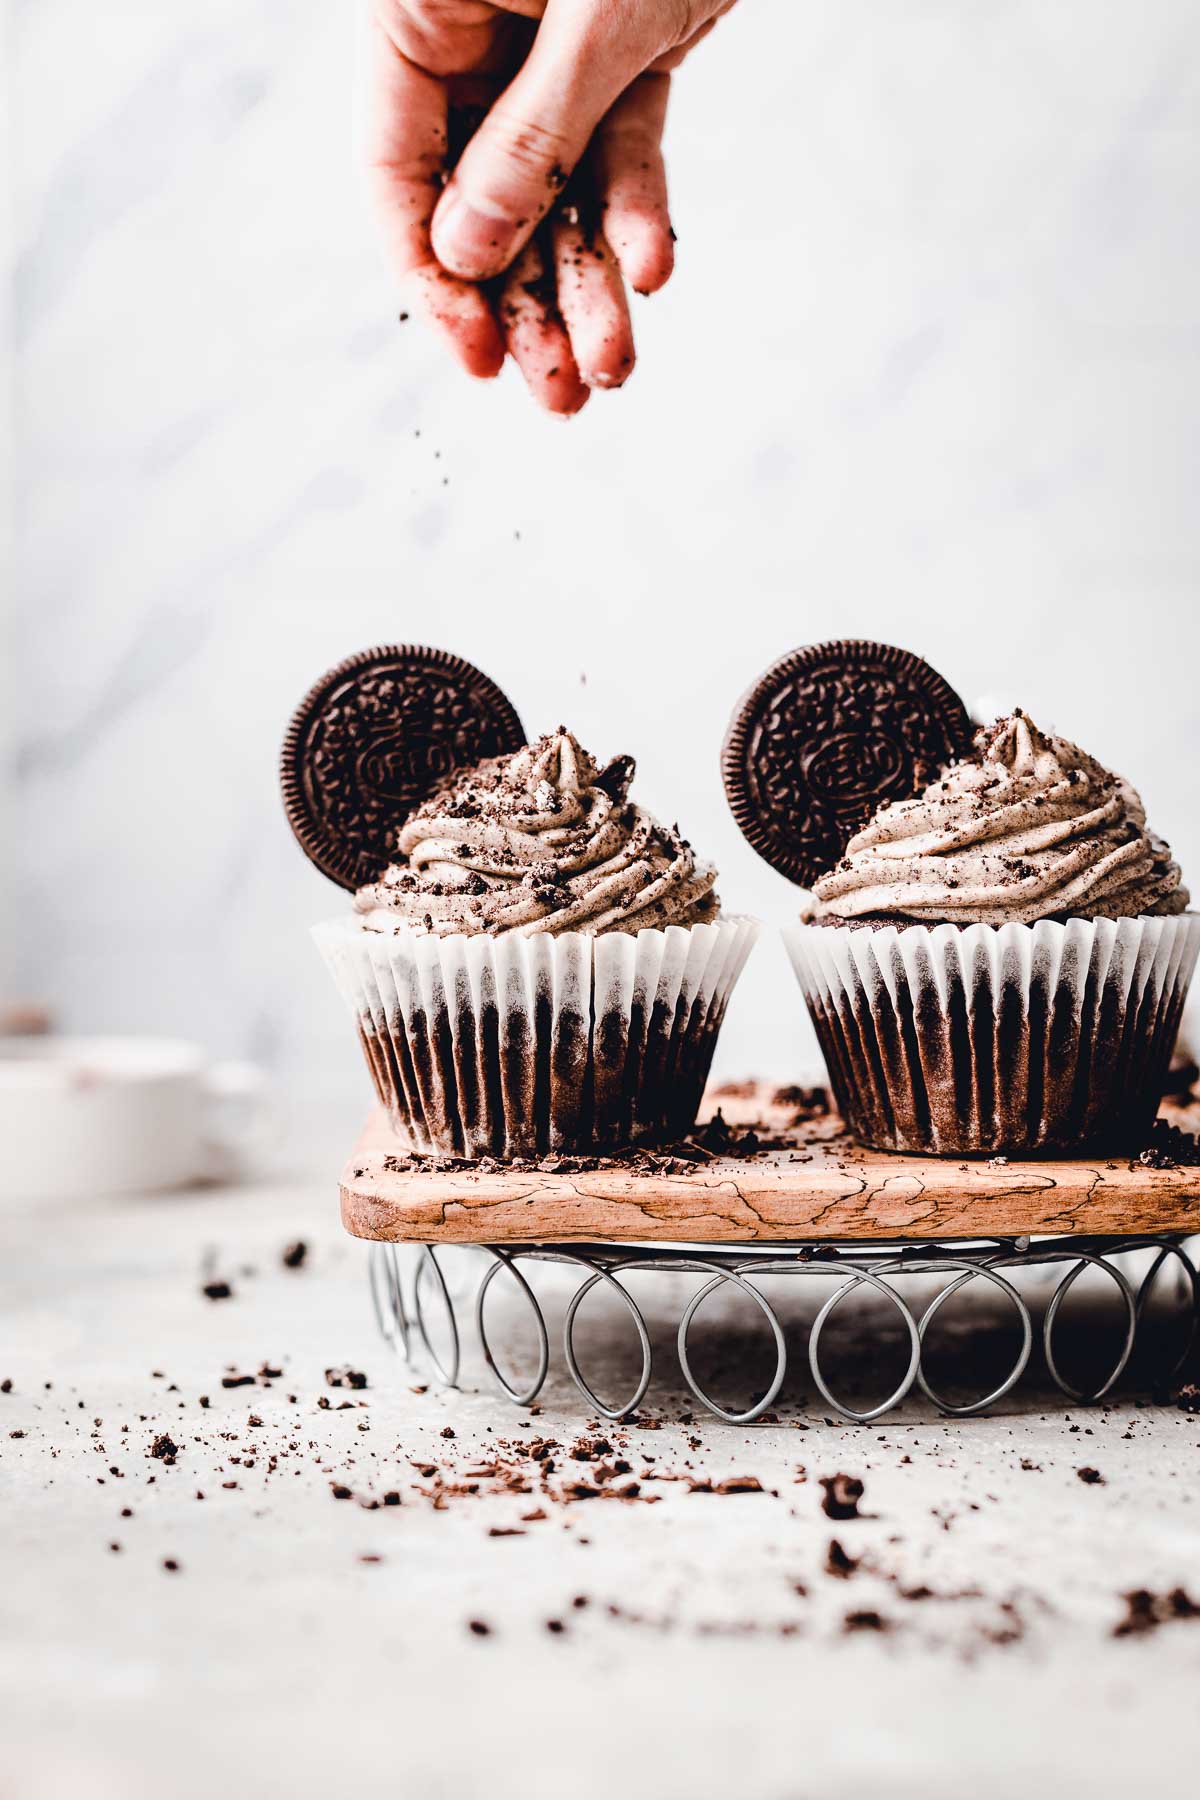 A hand topping off two chocolate Oreo cupcakes.